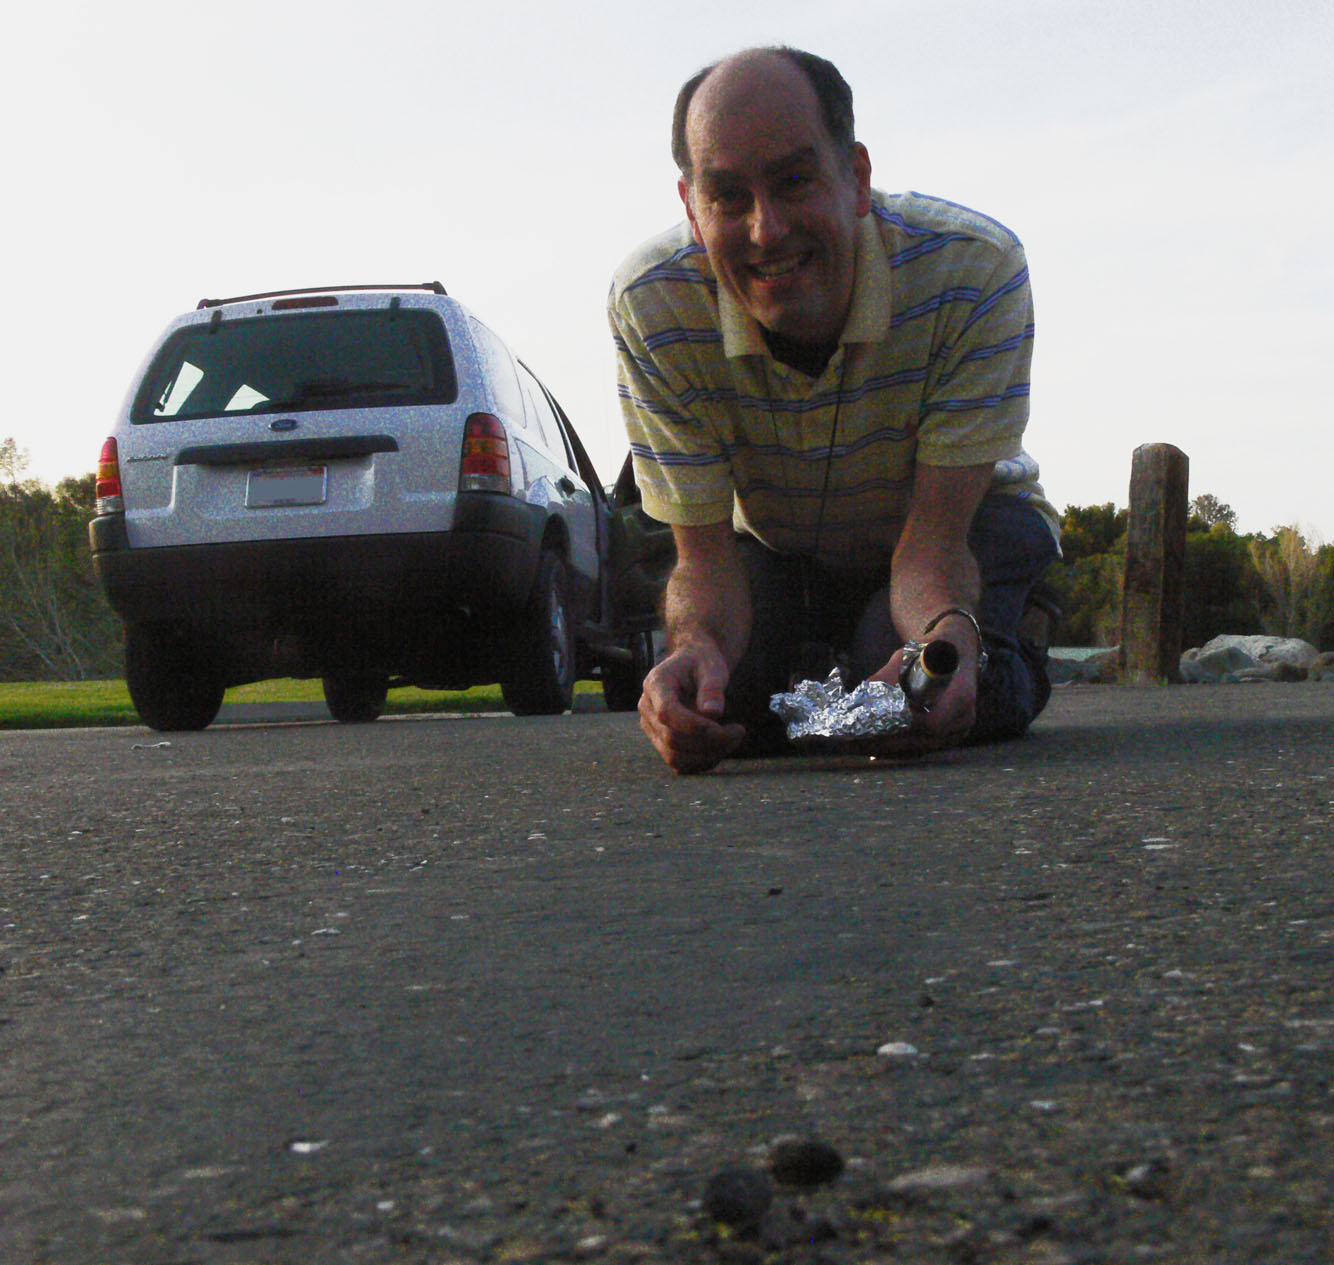 Peter Jenniskens collecting meteorite fragments with aluminum foil